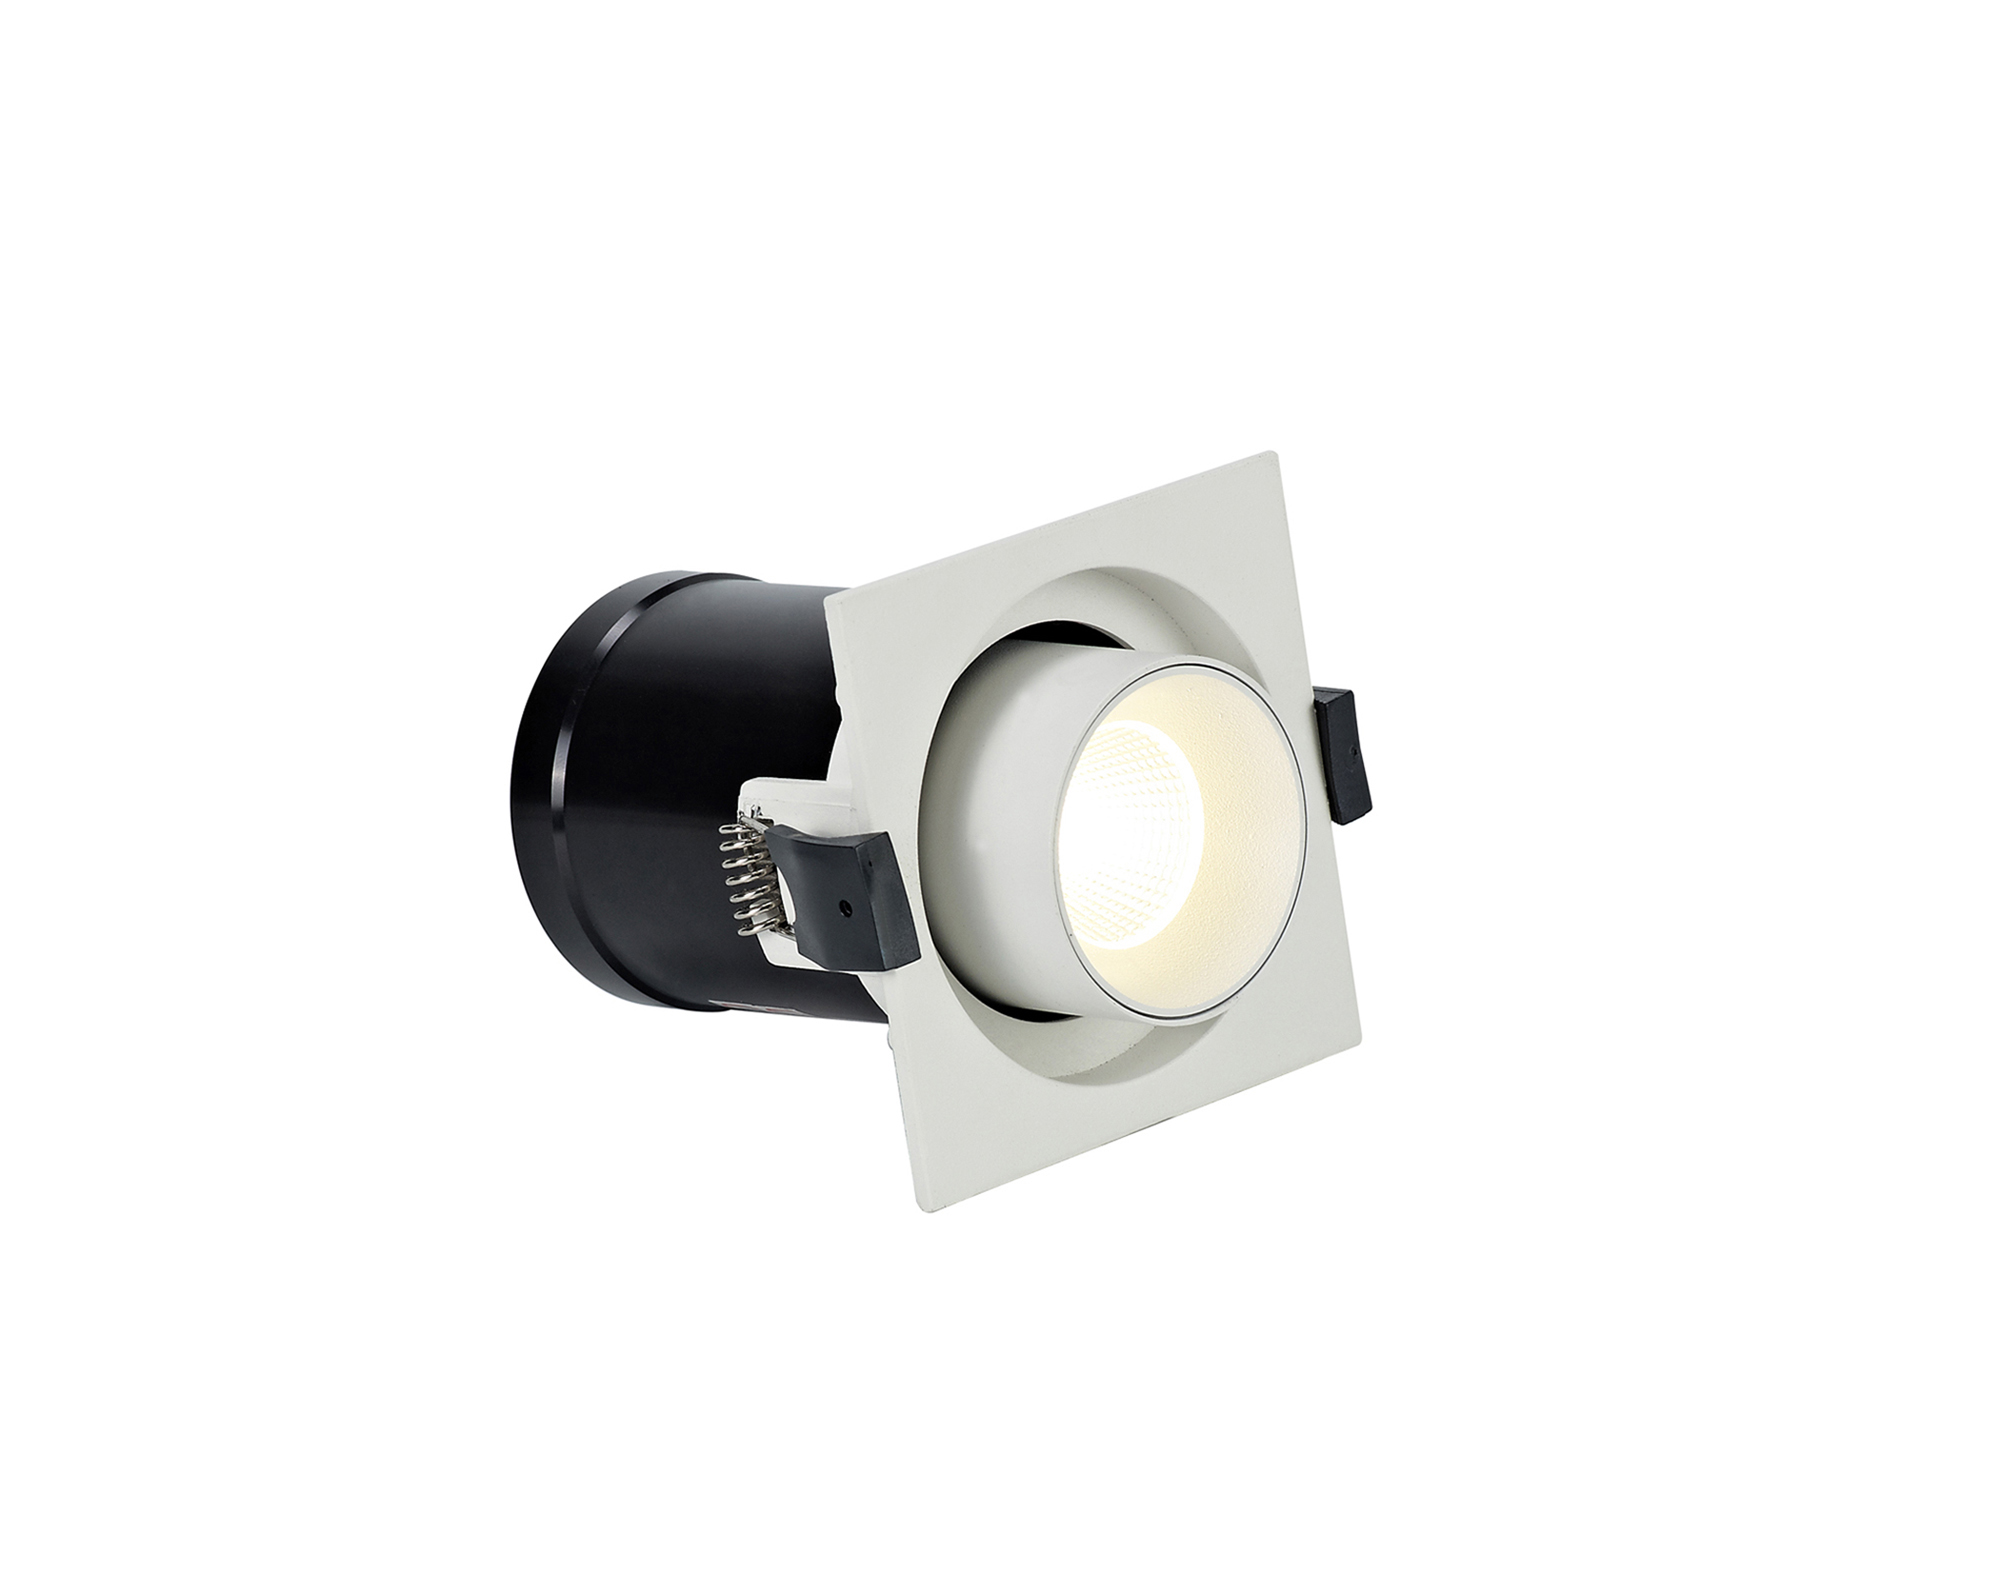 DX200374  Barda Retractable Recessed Swivel Square Spotlight; 8W; 3000K; 24°;585lm;White & White; Dia: 85mm Cut Out 75mm; 3yrs Warranty